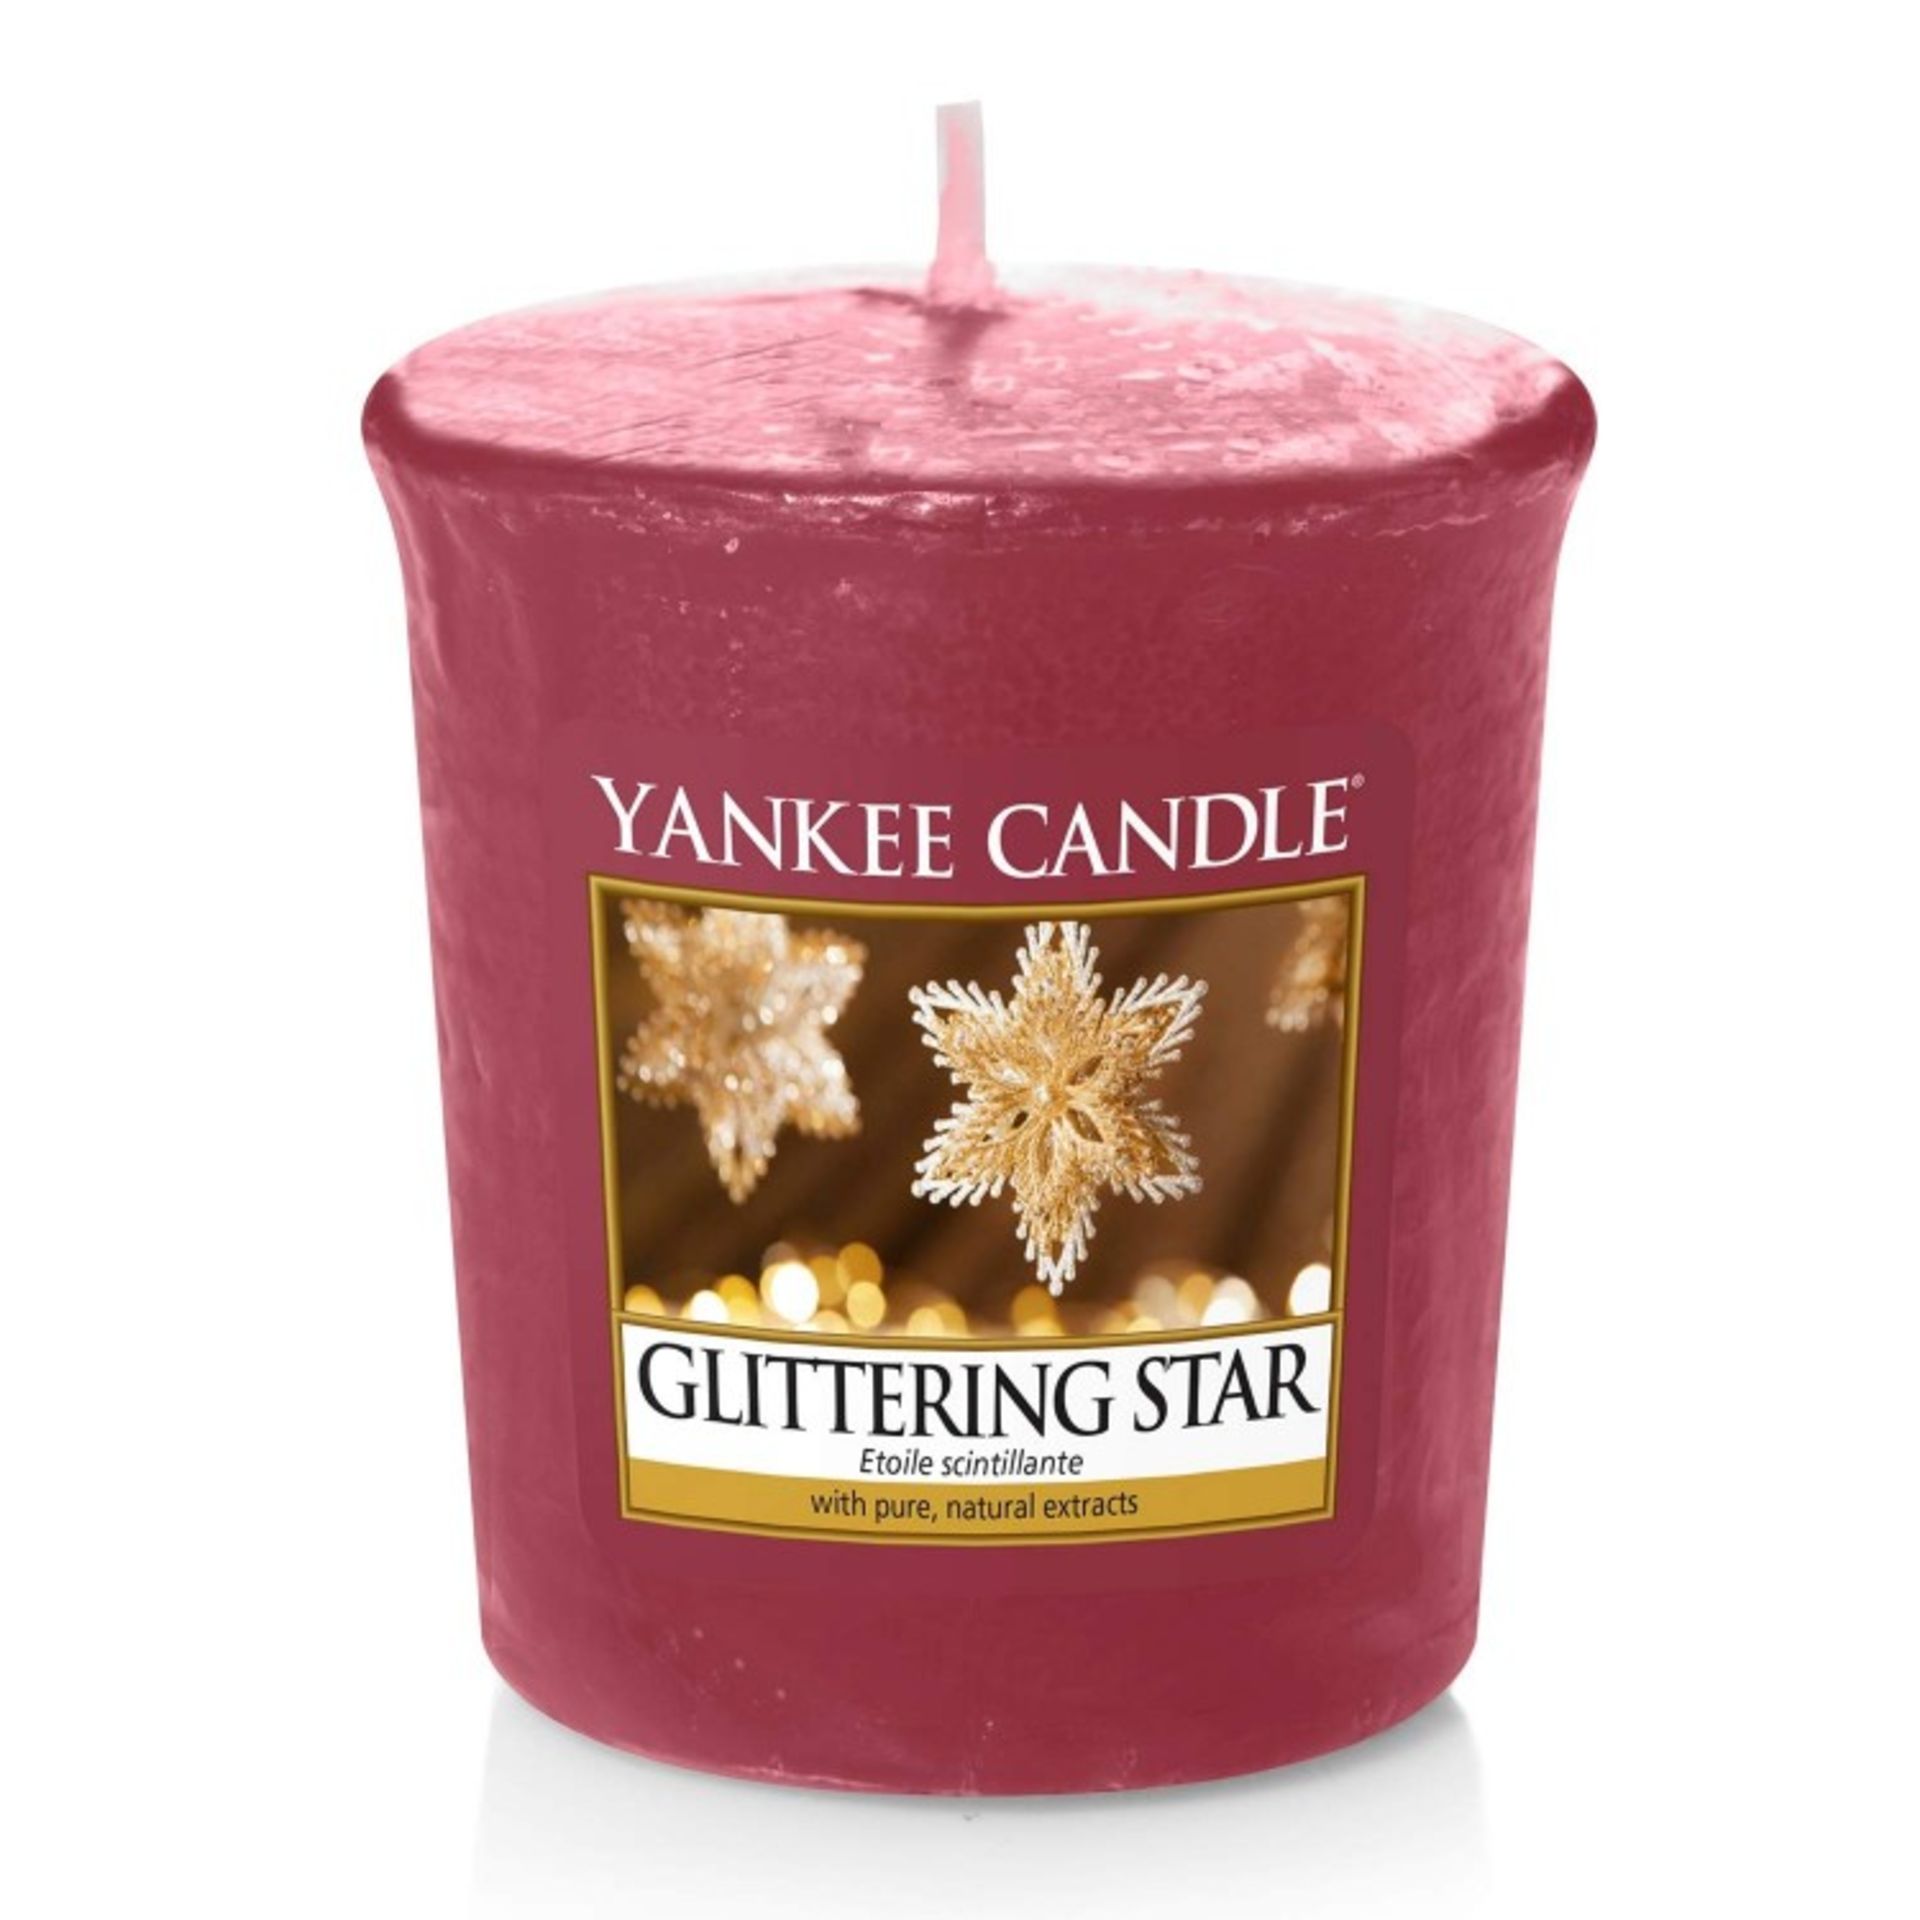 V Brand New 18 x Yankee Candle Votive - Glittering Star - RRP £35.82 - Item Is Available Approx 5